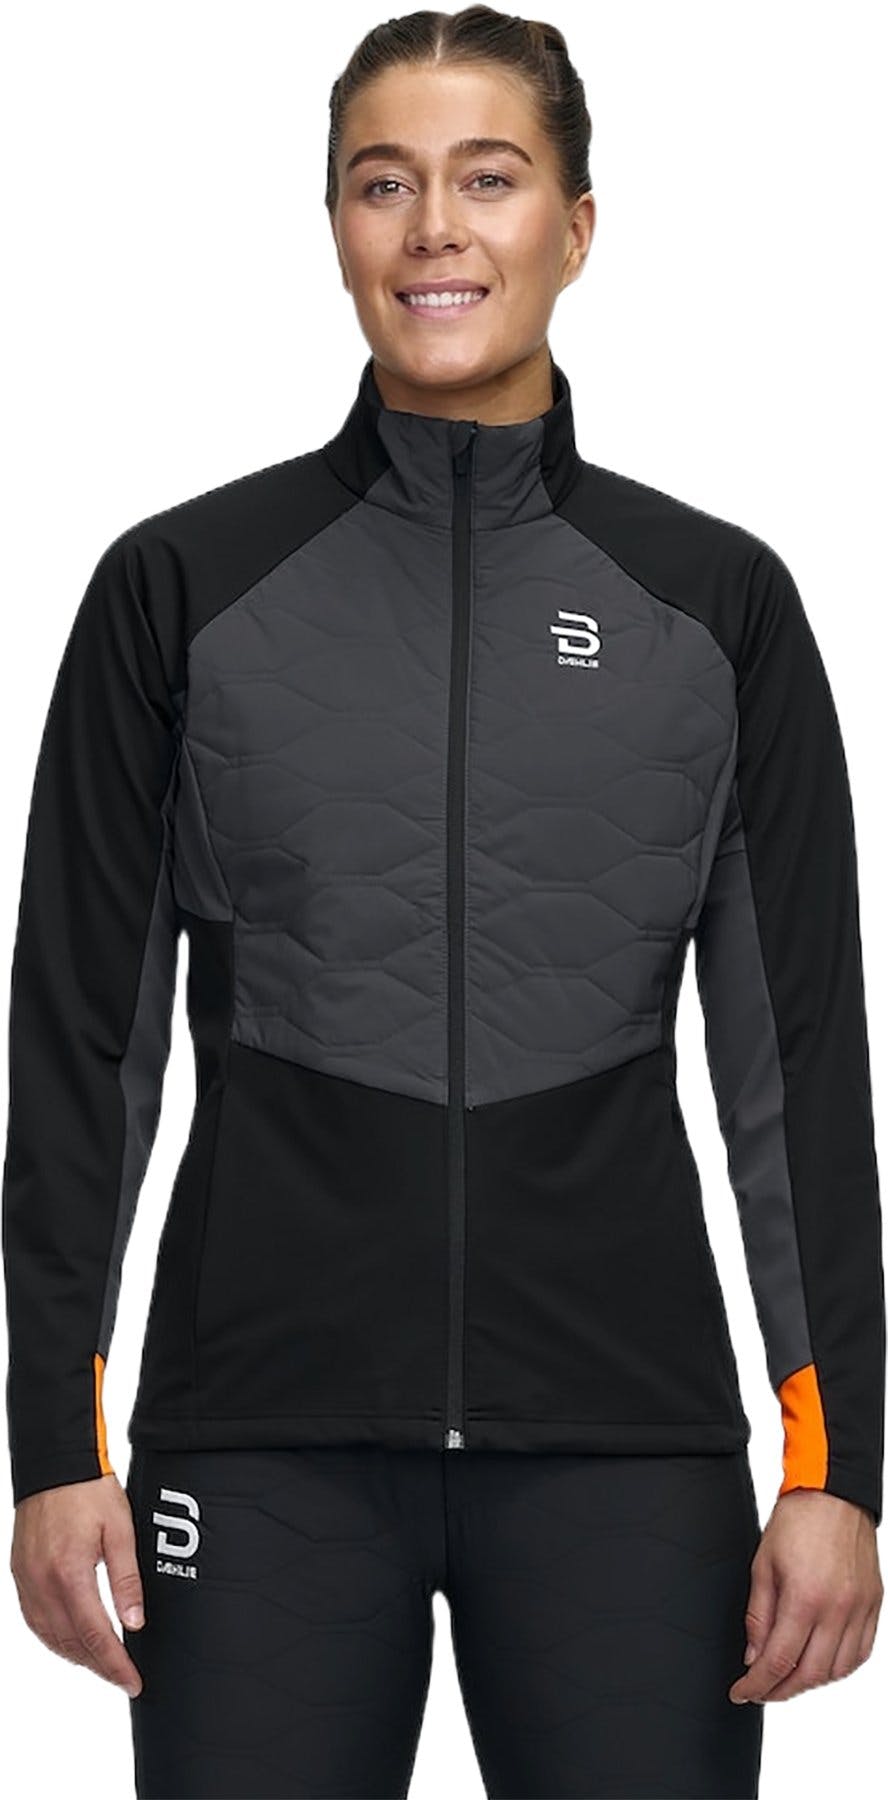 Product image for Challenge 2.0 Jacket - Women's